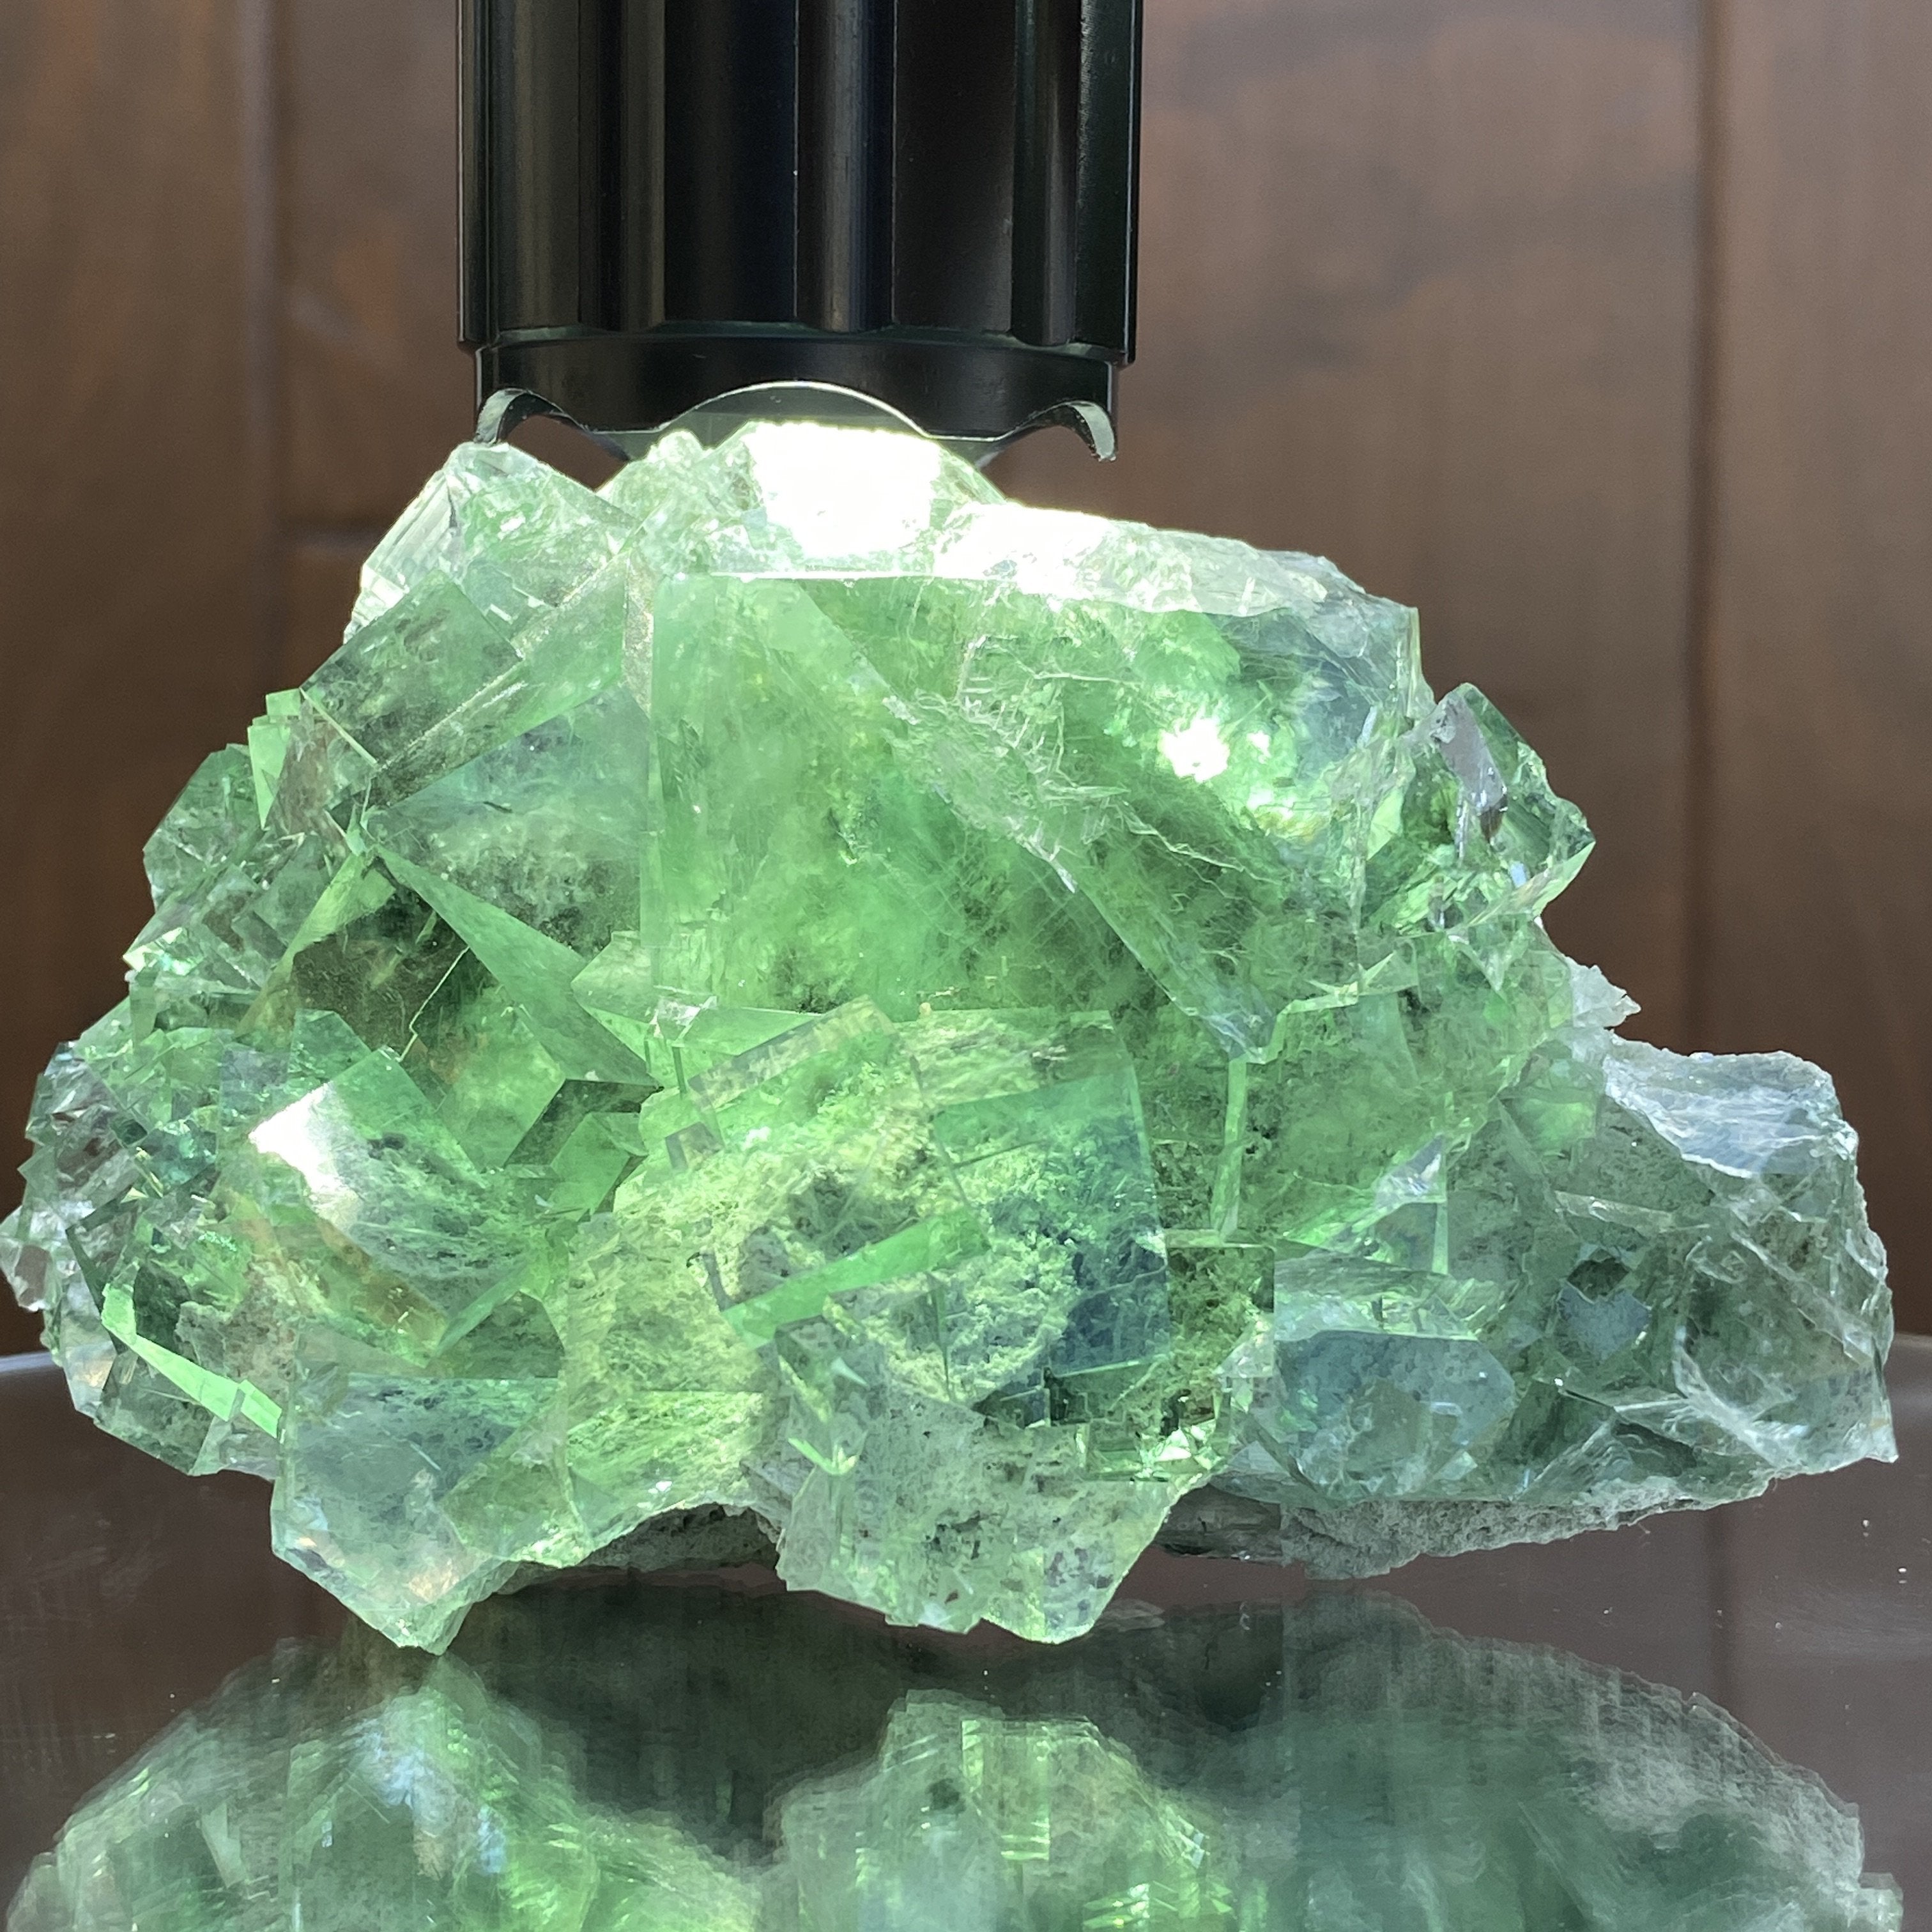 350g 10x7x7cm Glass Green Clear Transparent Fluorite from China - Locco Decor